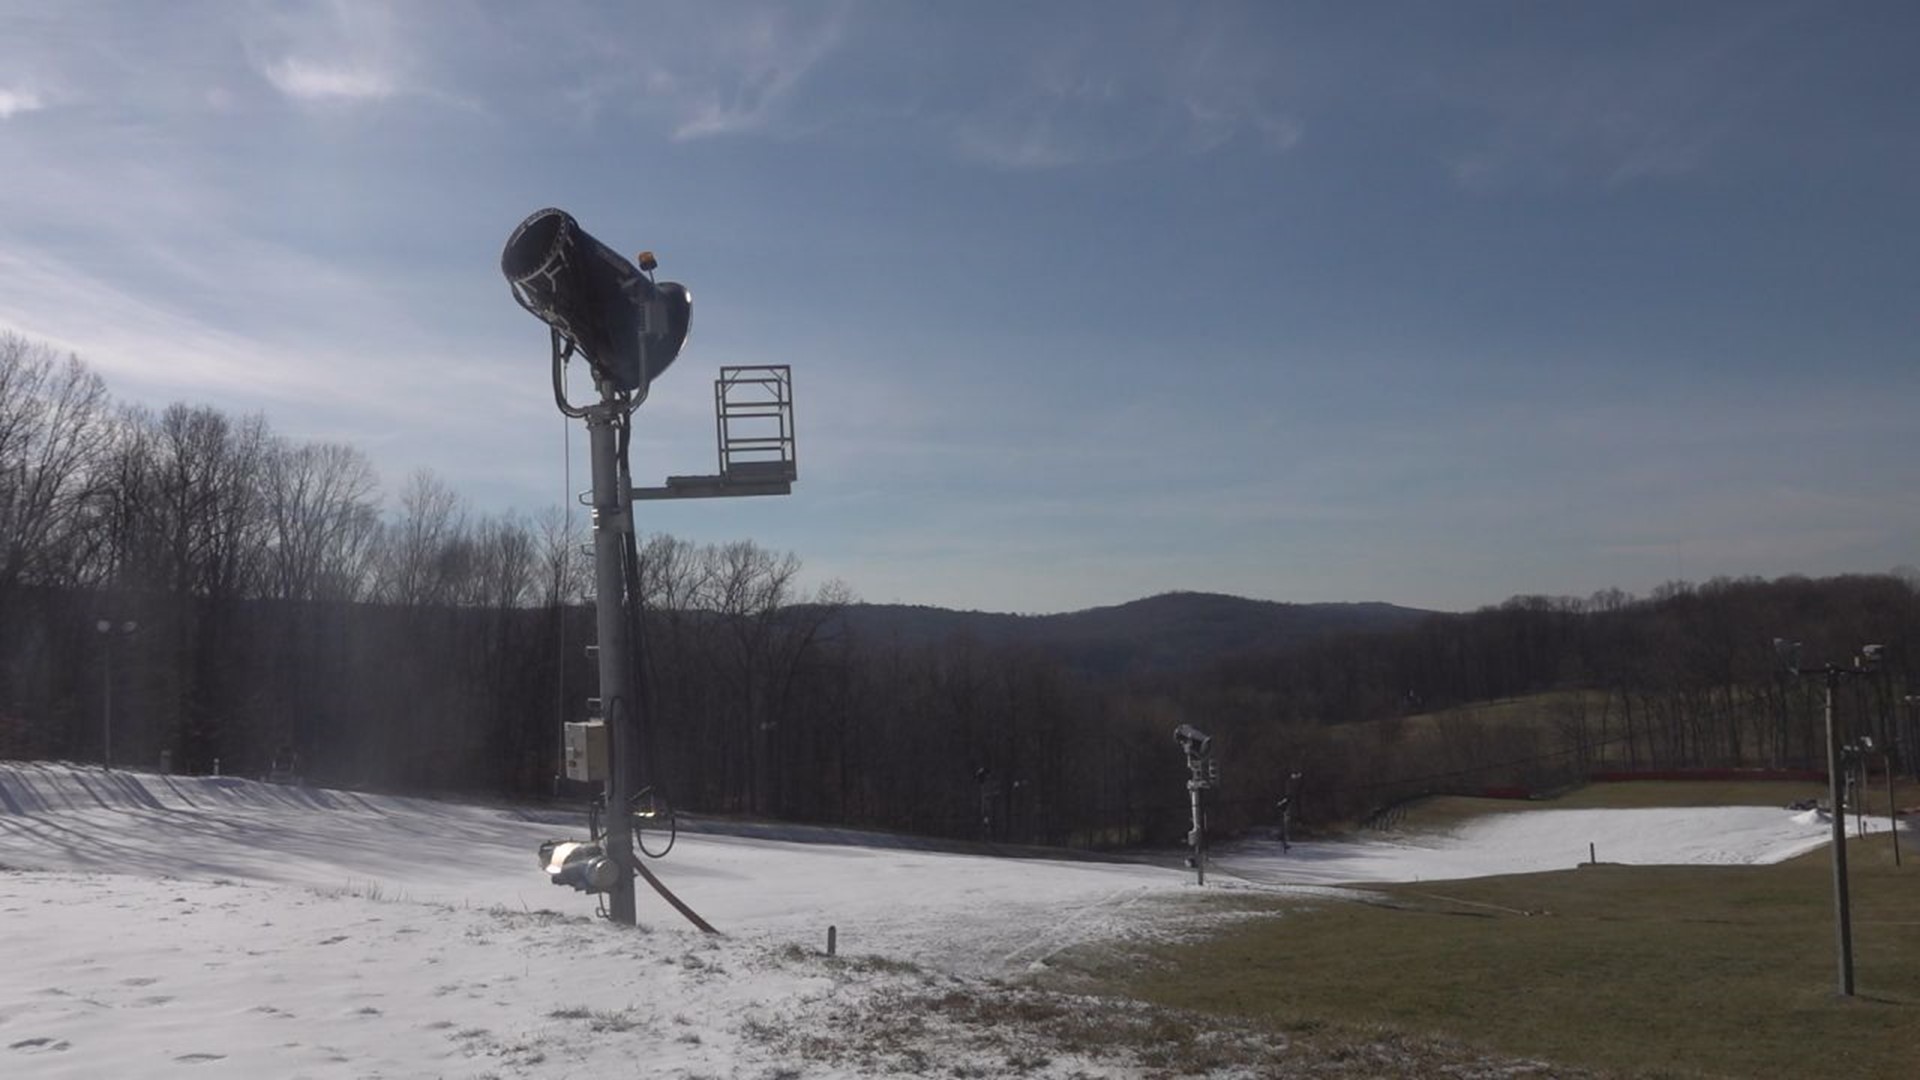 Milder temperatures mean less time for snowmaking to coat local slopes.